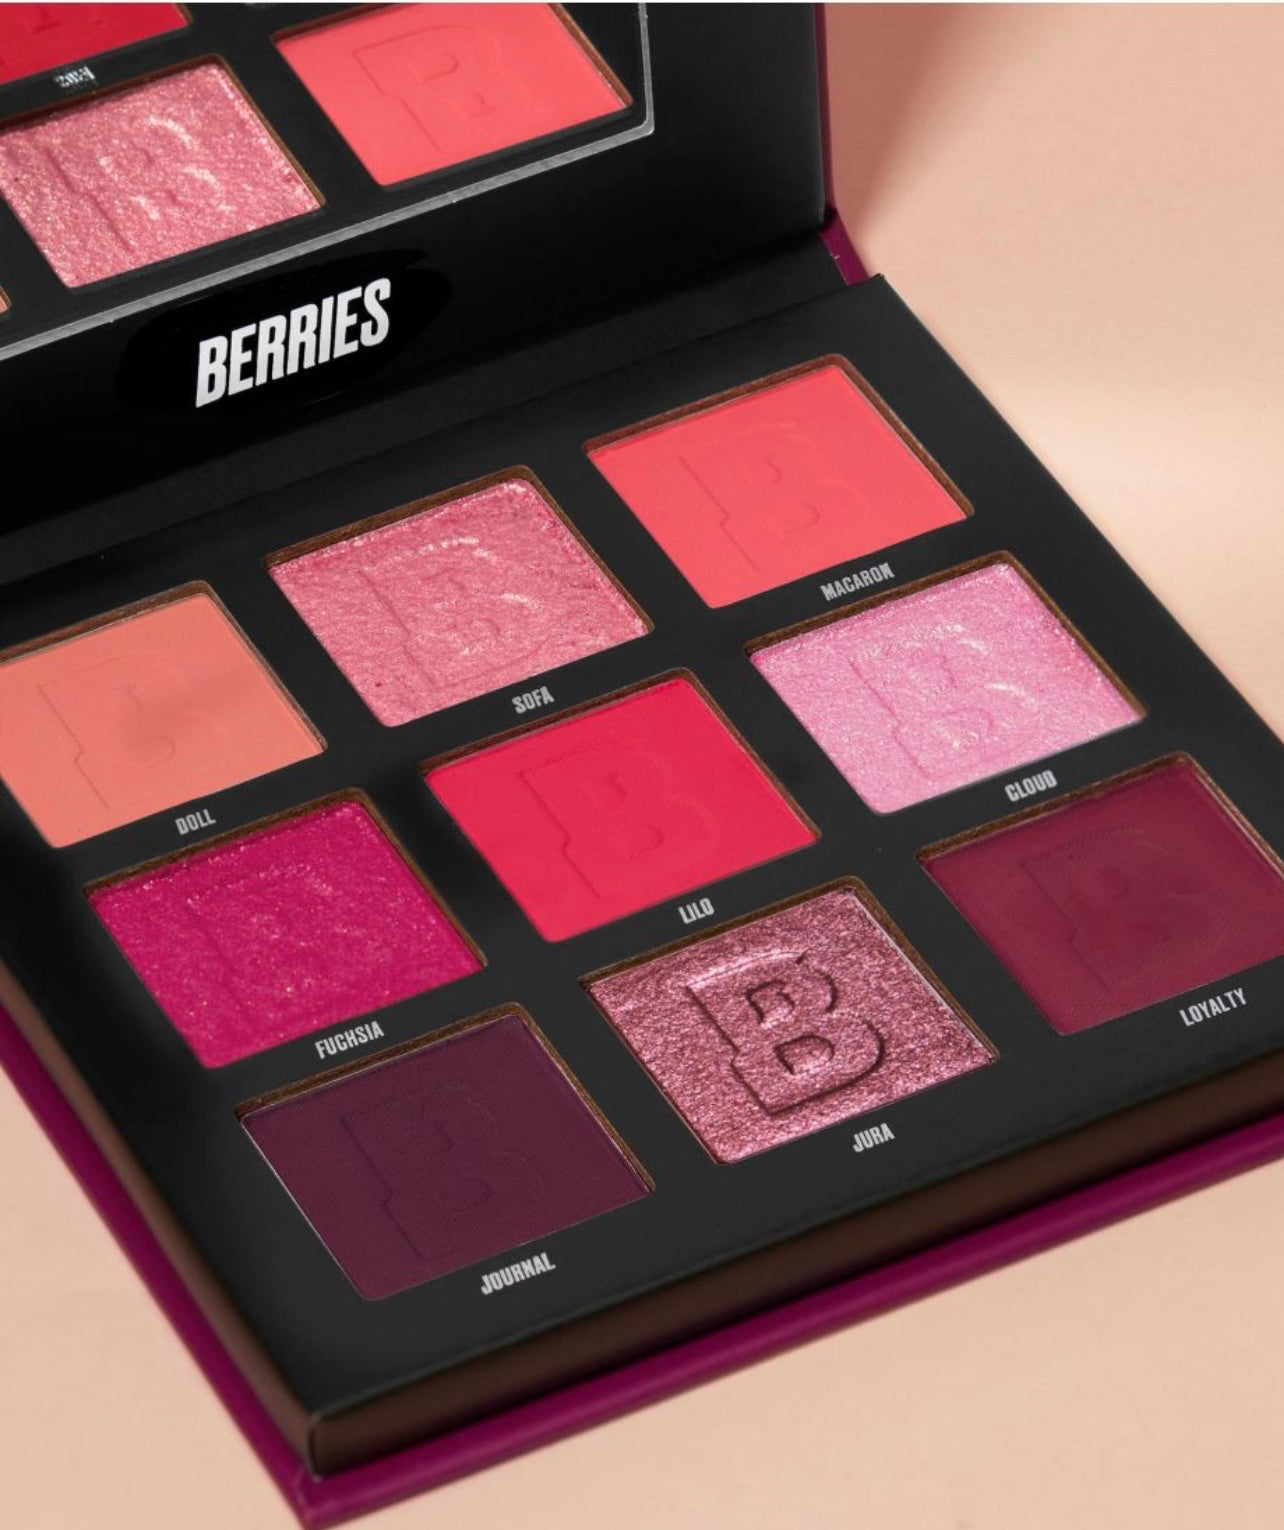 BY BEAUTY BAY
Berries 9 Colour Palette